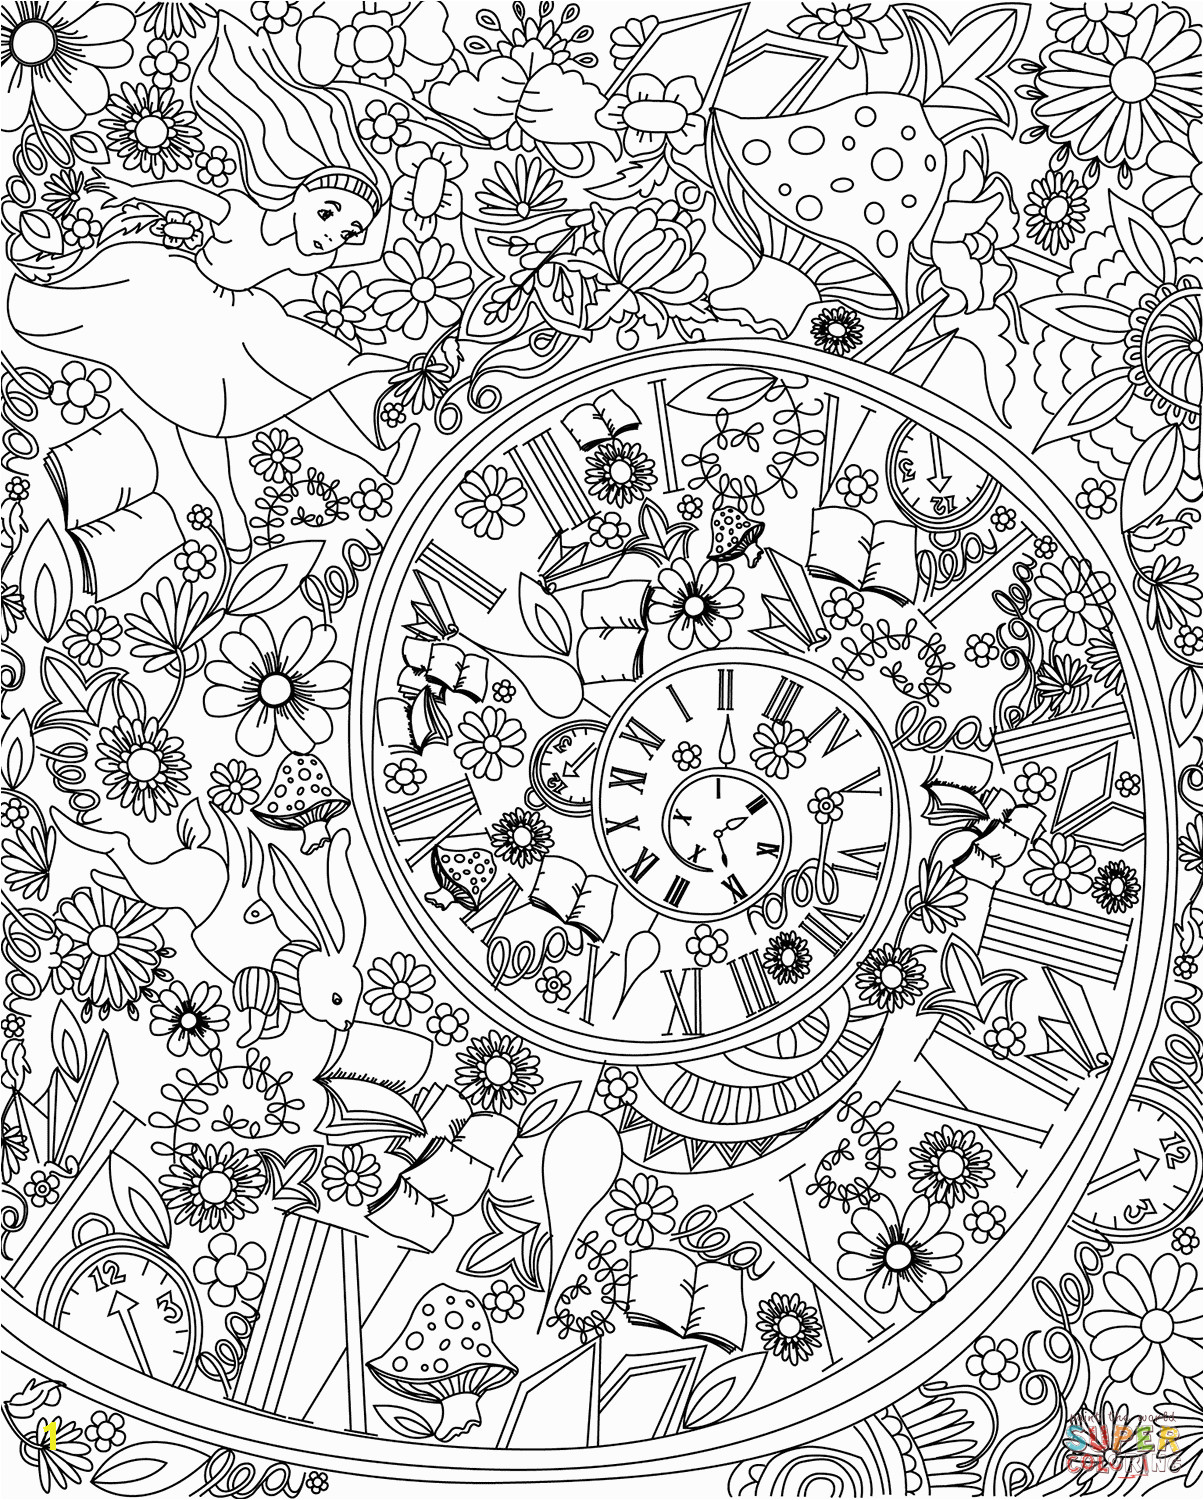 Alice In Wonderland Trippy Coloring Pages Trippy Alice In Wonderland Coloring Pages